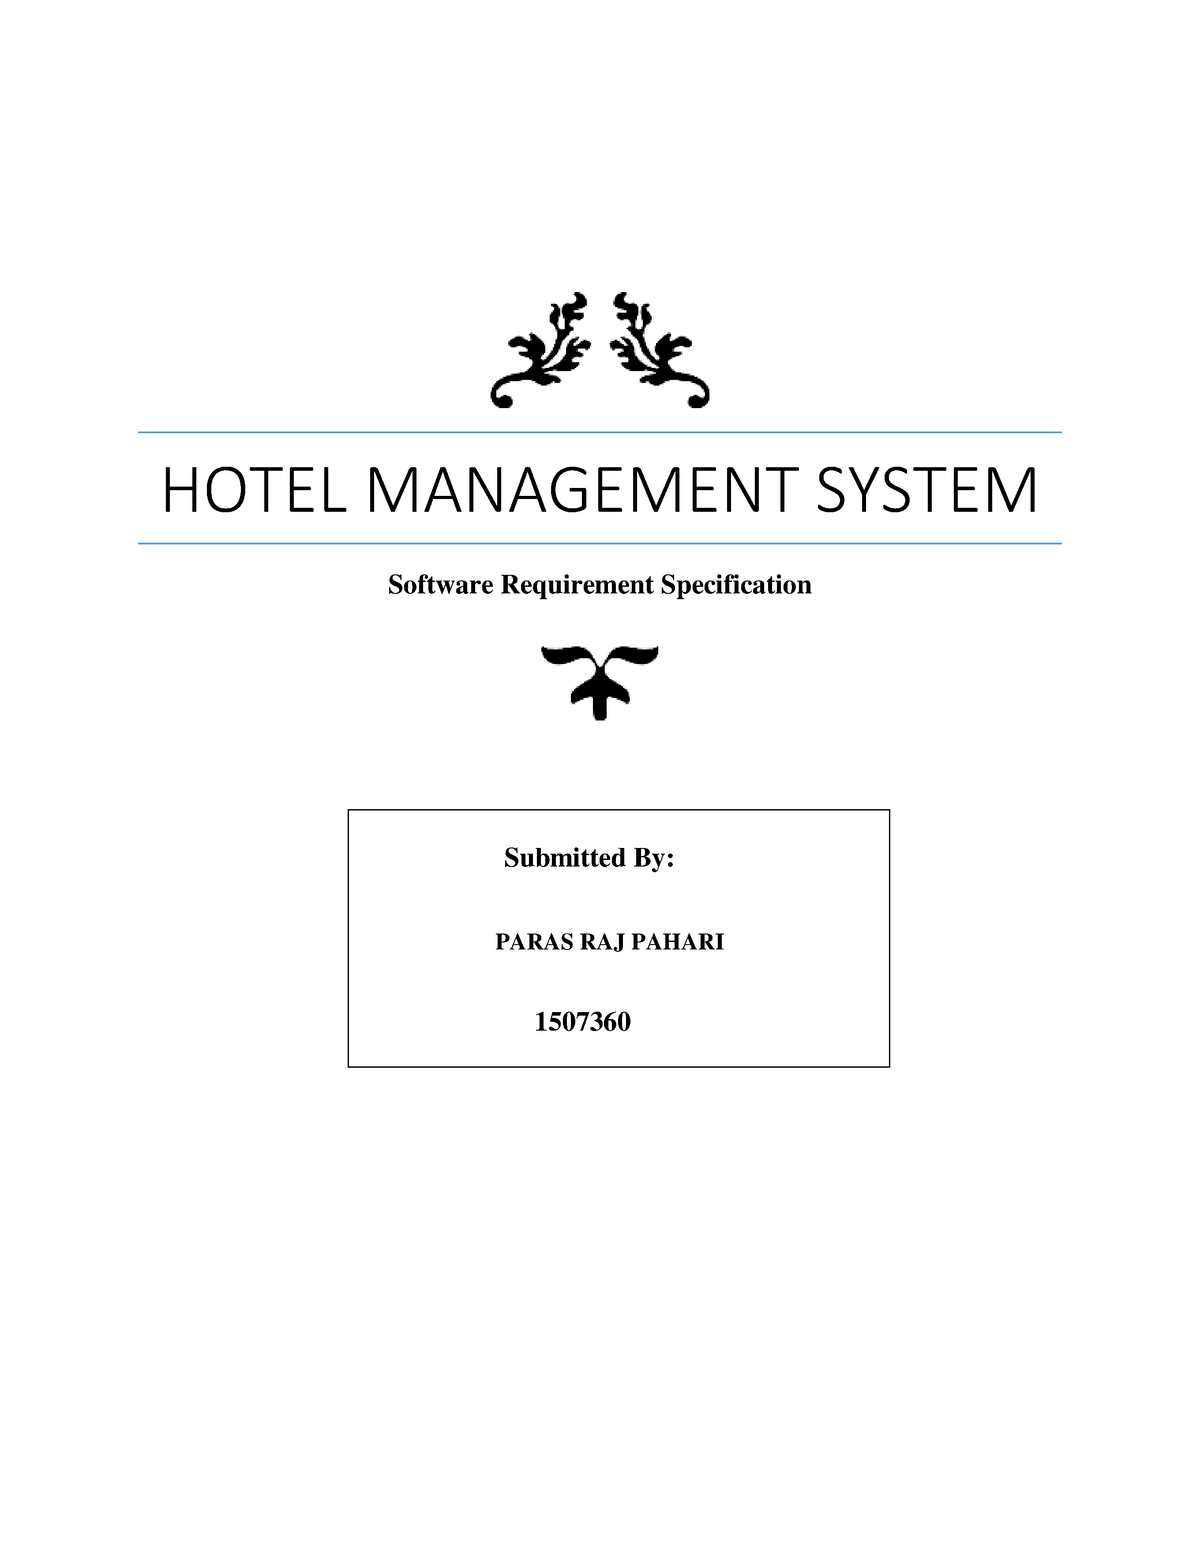 Hotel Management System SRS - Software Requirement Specification ...